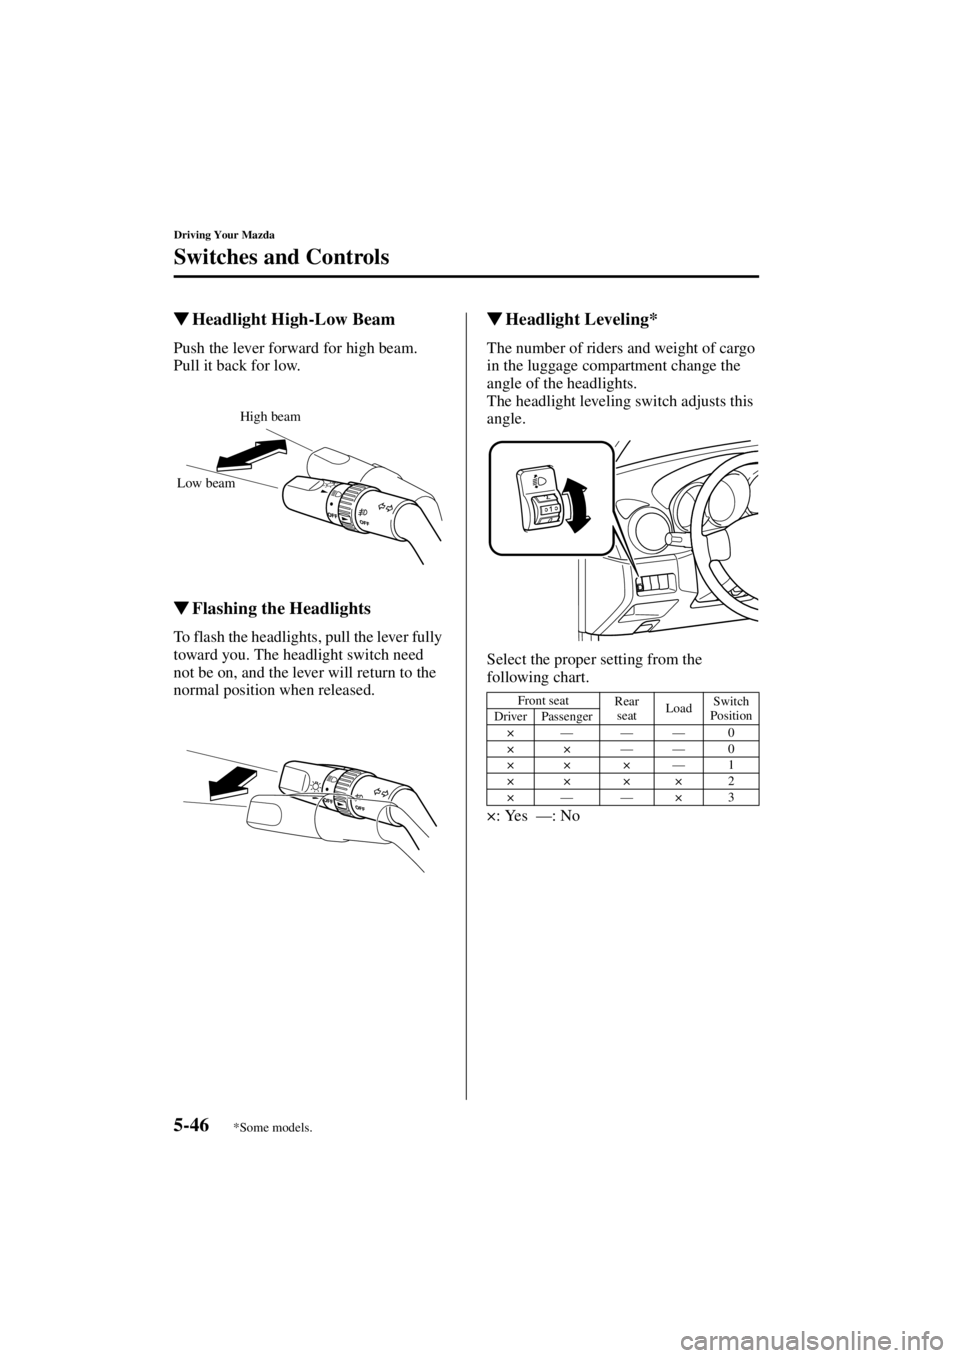 MAZDA MODEL 3 5-DOOR 2004 User Guide 5-46
Driving Your Mazda
Switches and Controls
Form No. 8S18-EA-03I
Headlight High-Low Beam
Push the lever forward for high beam.
Pull it back for low.
Flashing the Headlights
To flash the headlights